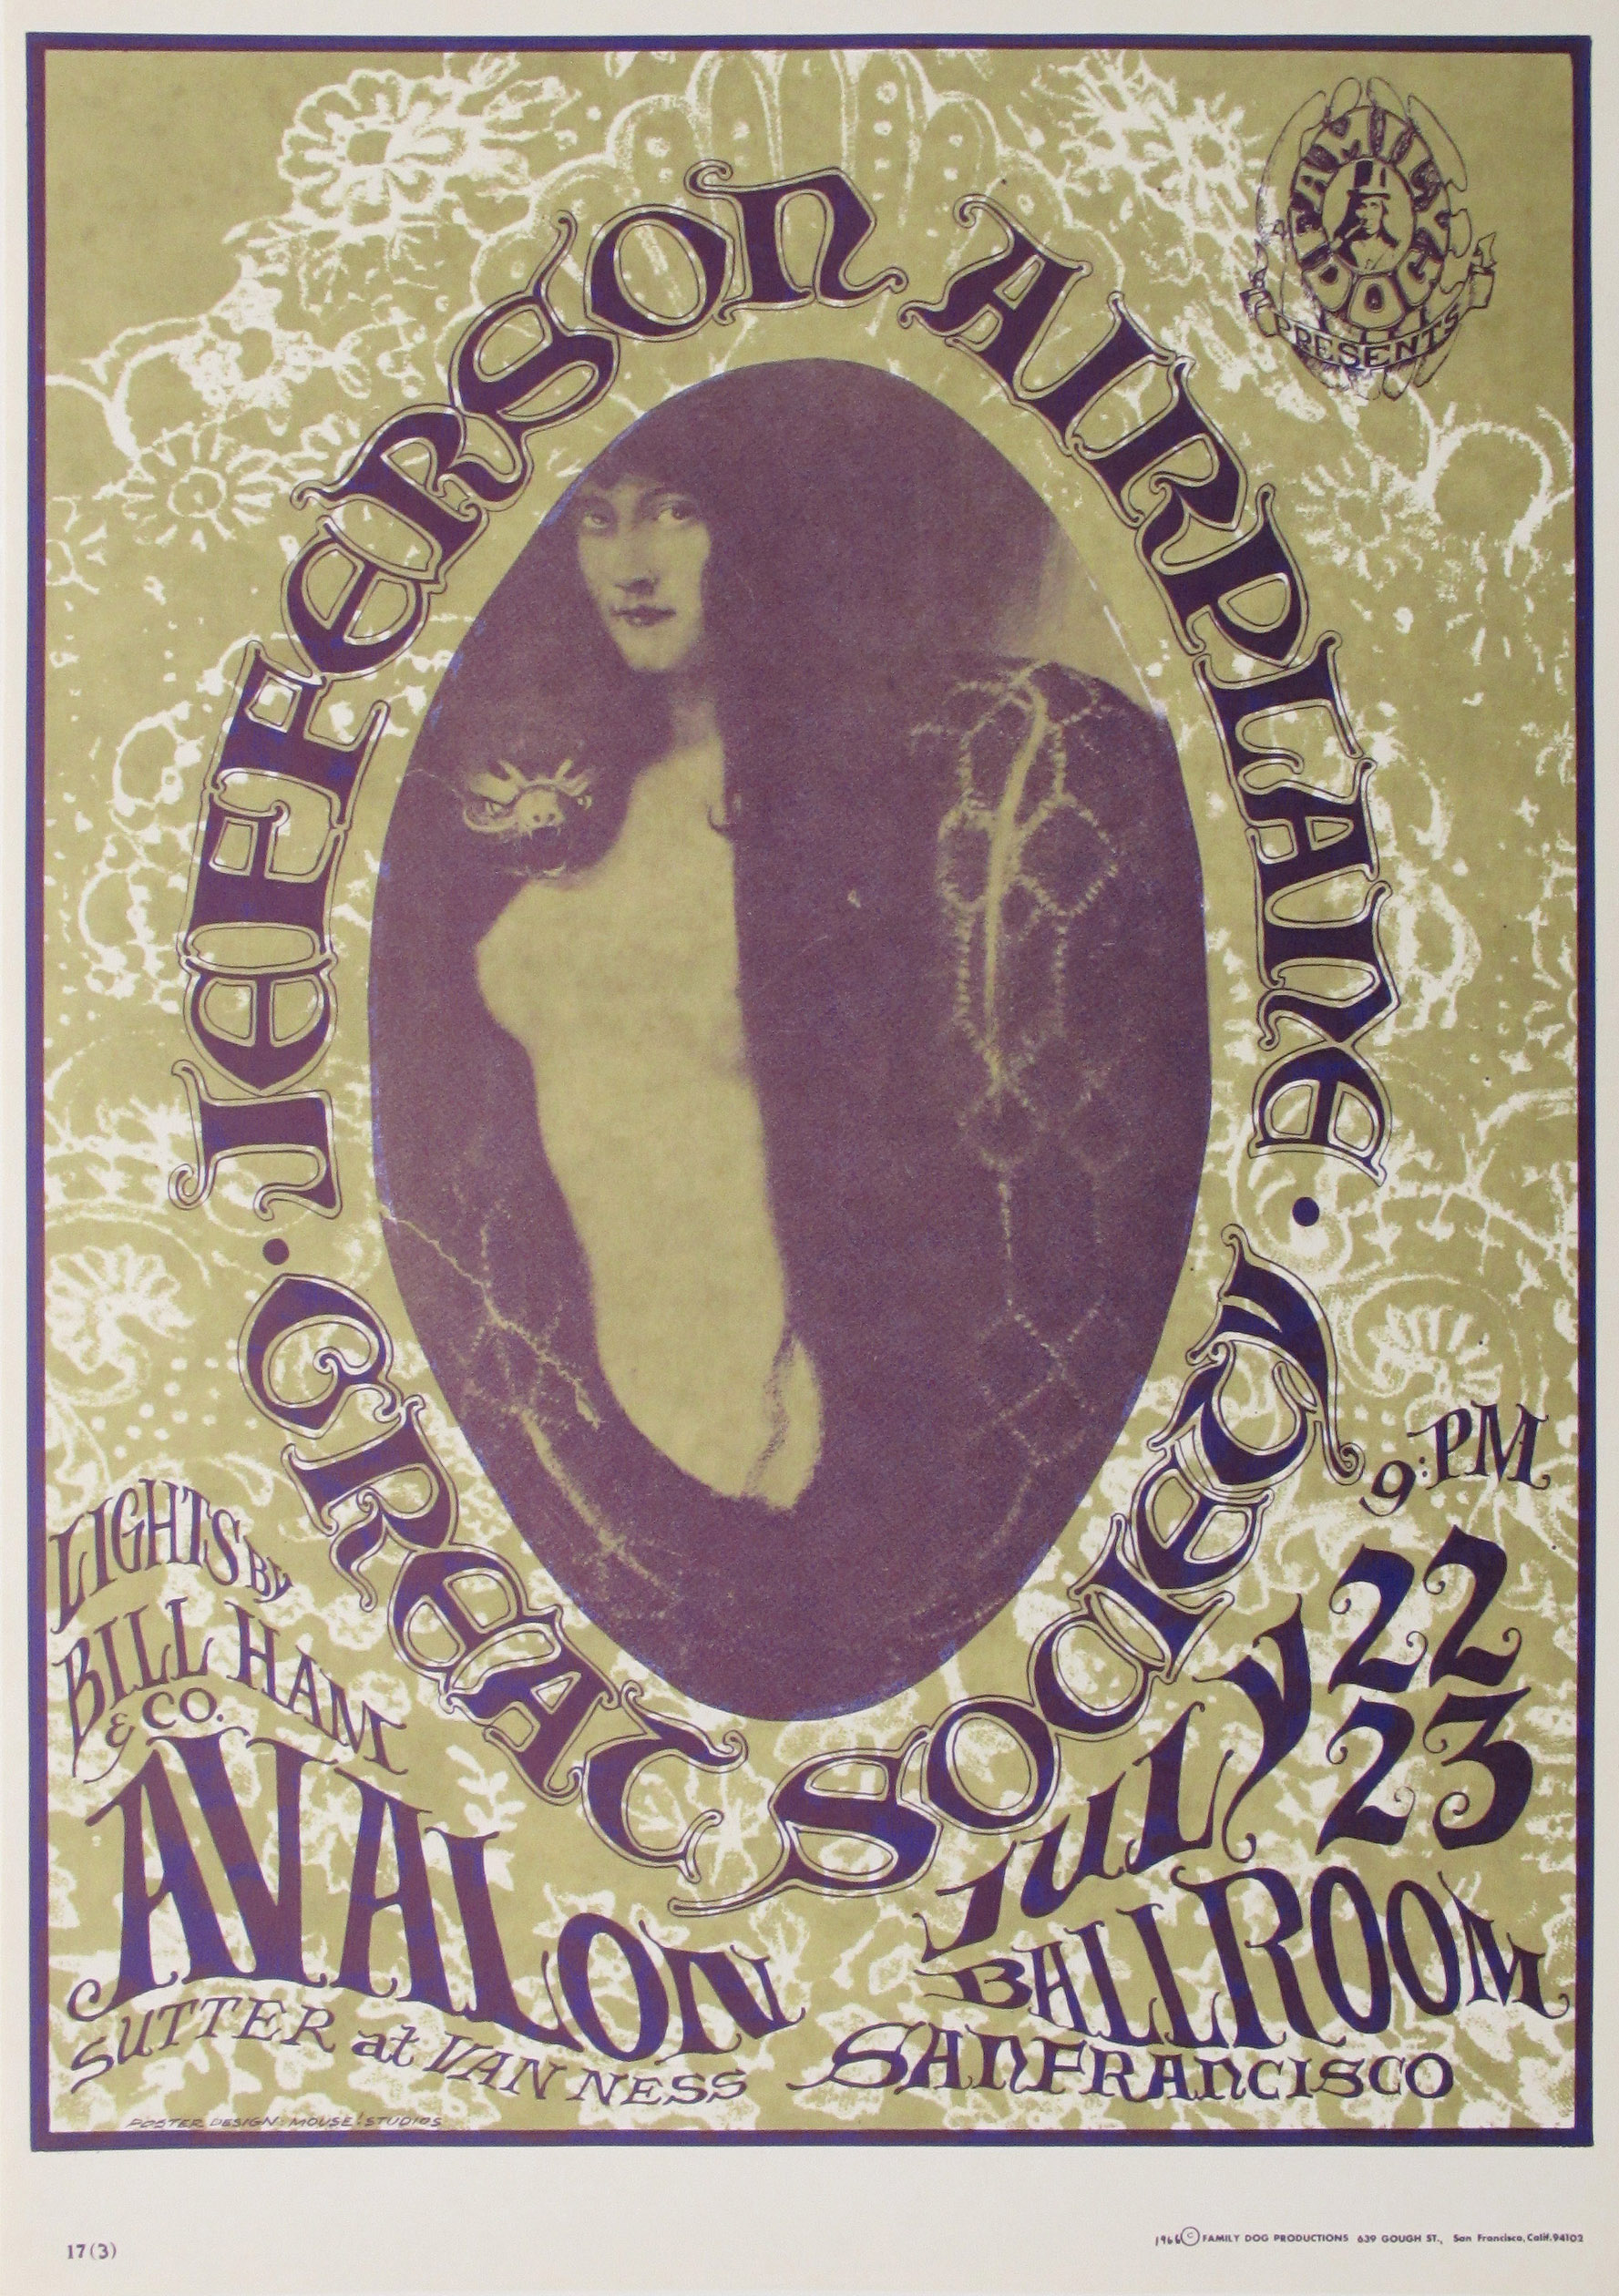 Jefferson Airplane and The Great Society Concert Poster